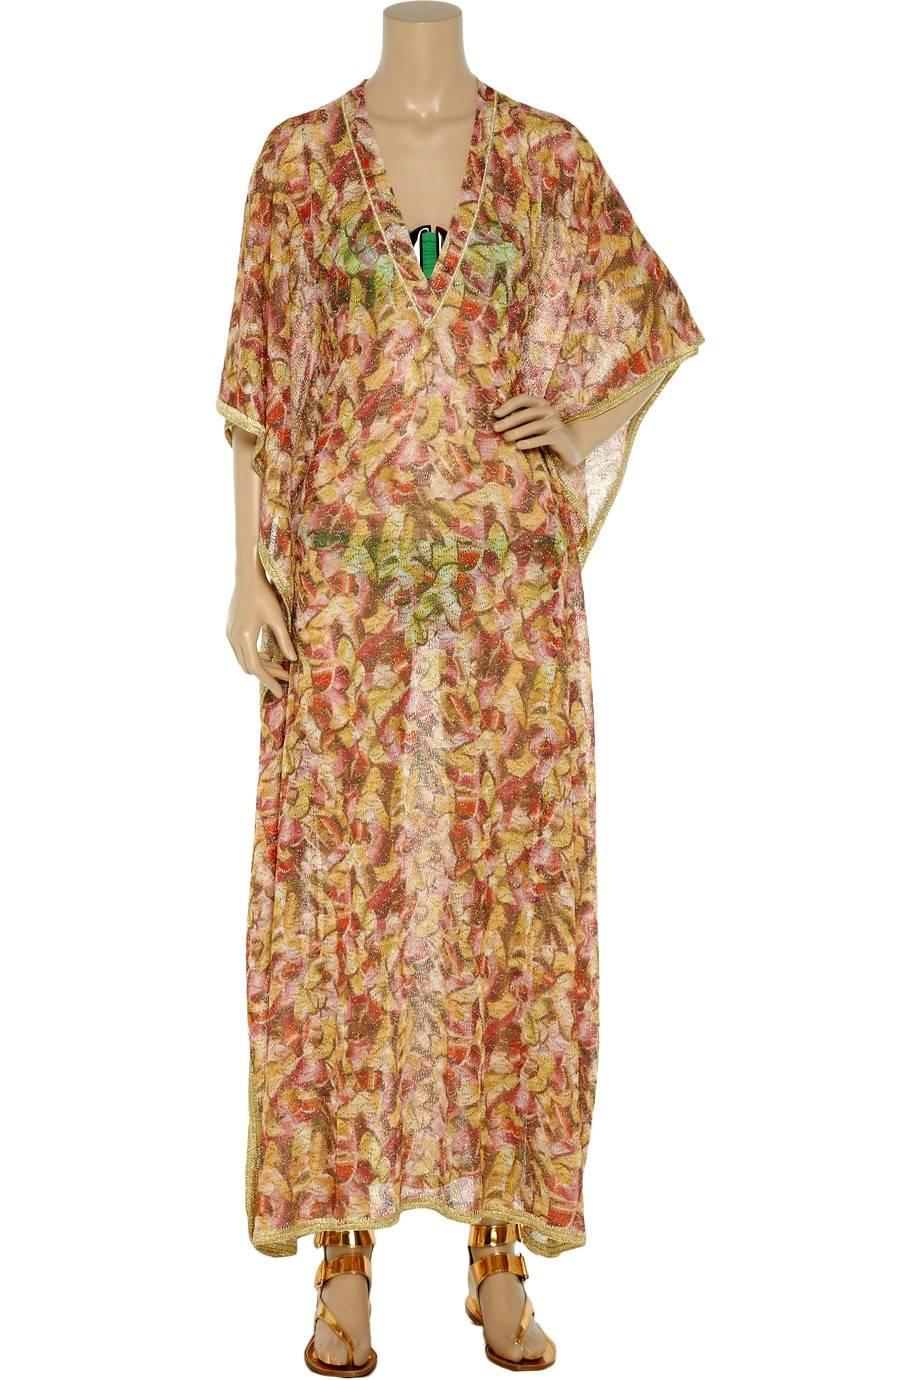 Beautiful multicolored golden lurex MISSONI kaftan maxi dress
Classic MISSONI signature knit
Maxi length
Simply slips on
V-Neck
Beautiful lurex crochet knits
Gold metallic trimming
 Batwing sleeves
    Dry Clean only
    Made in Italy
 

